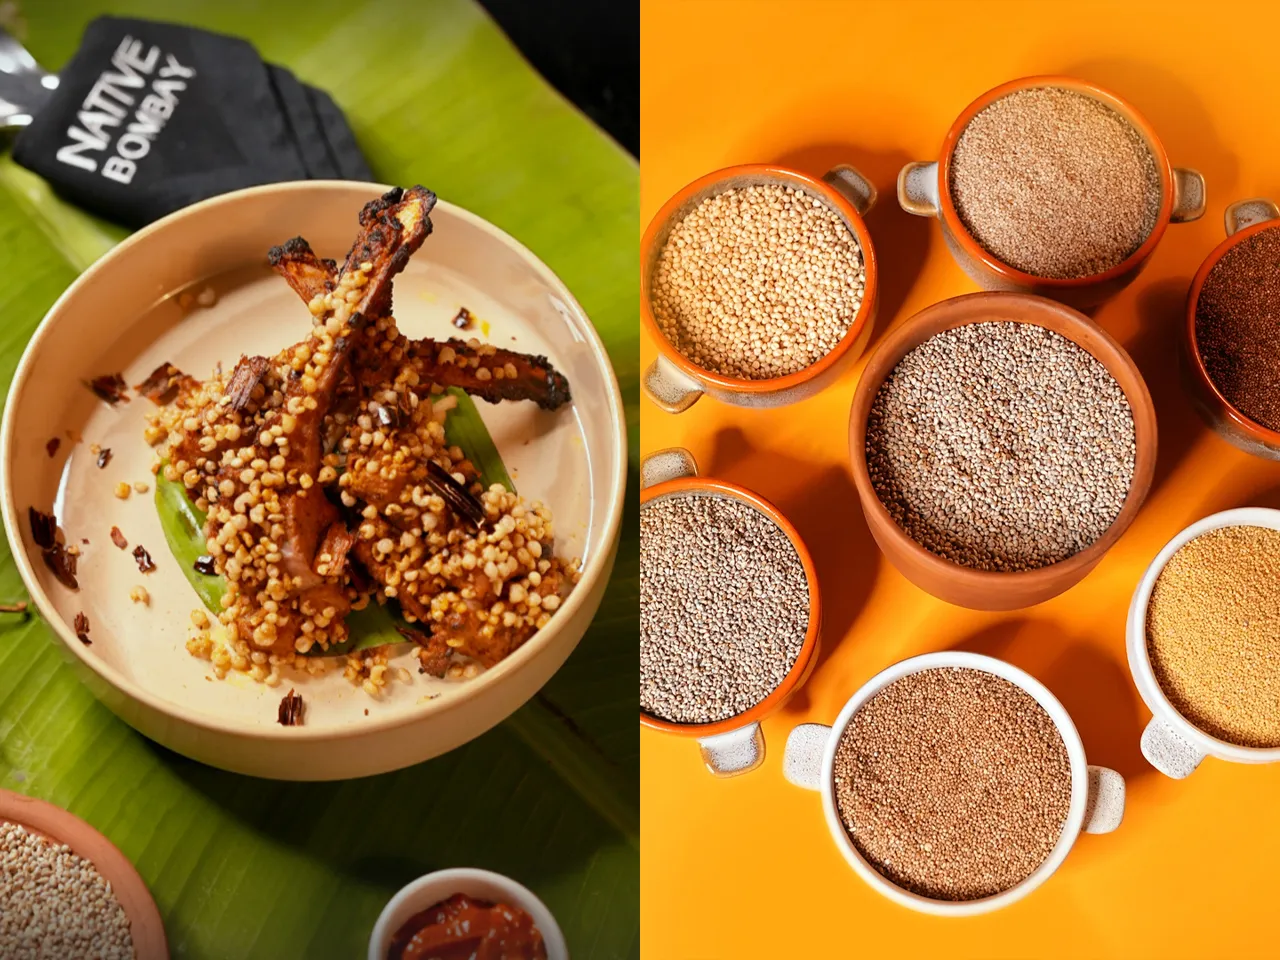 Native Bombay and The Locavore Join Forces For A Special Millet Menu Extravaganza!